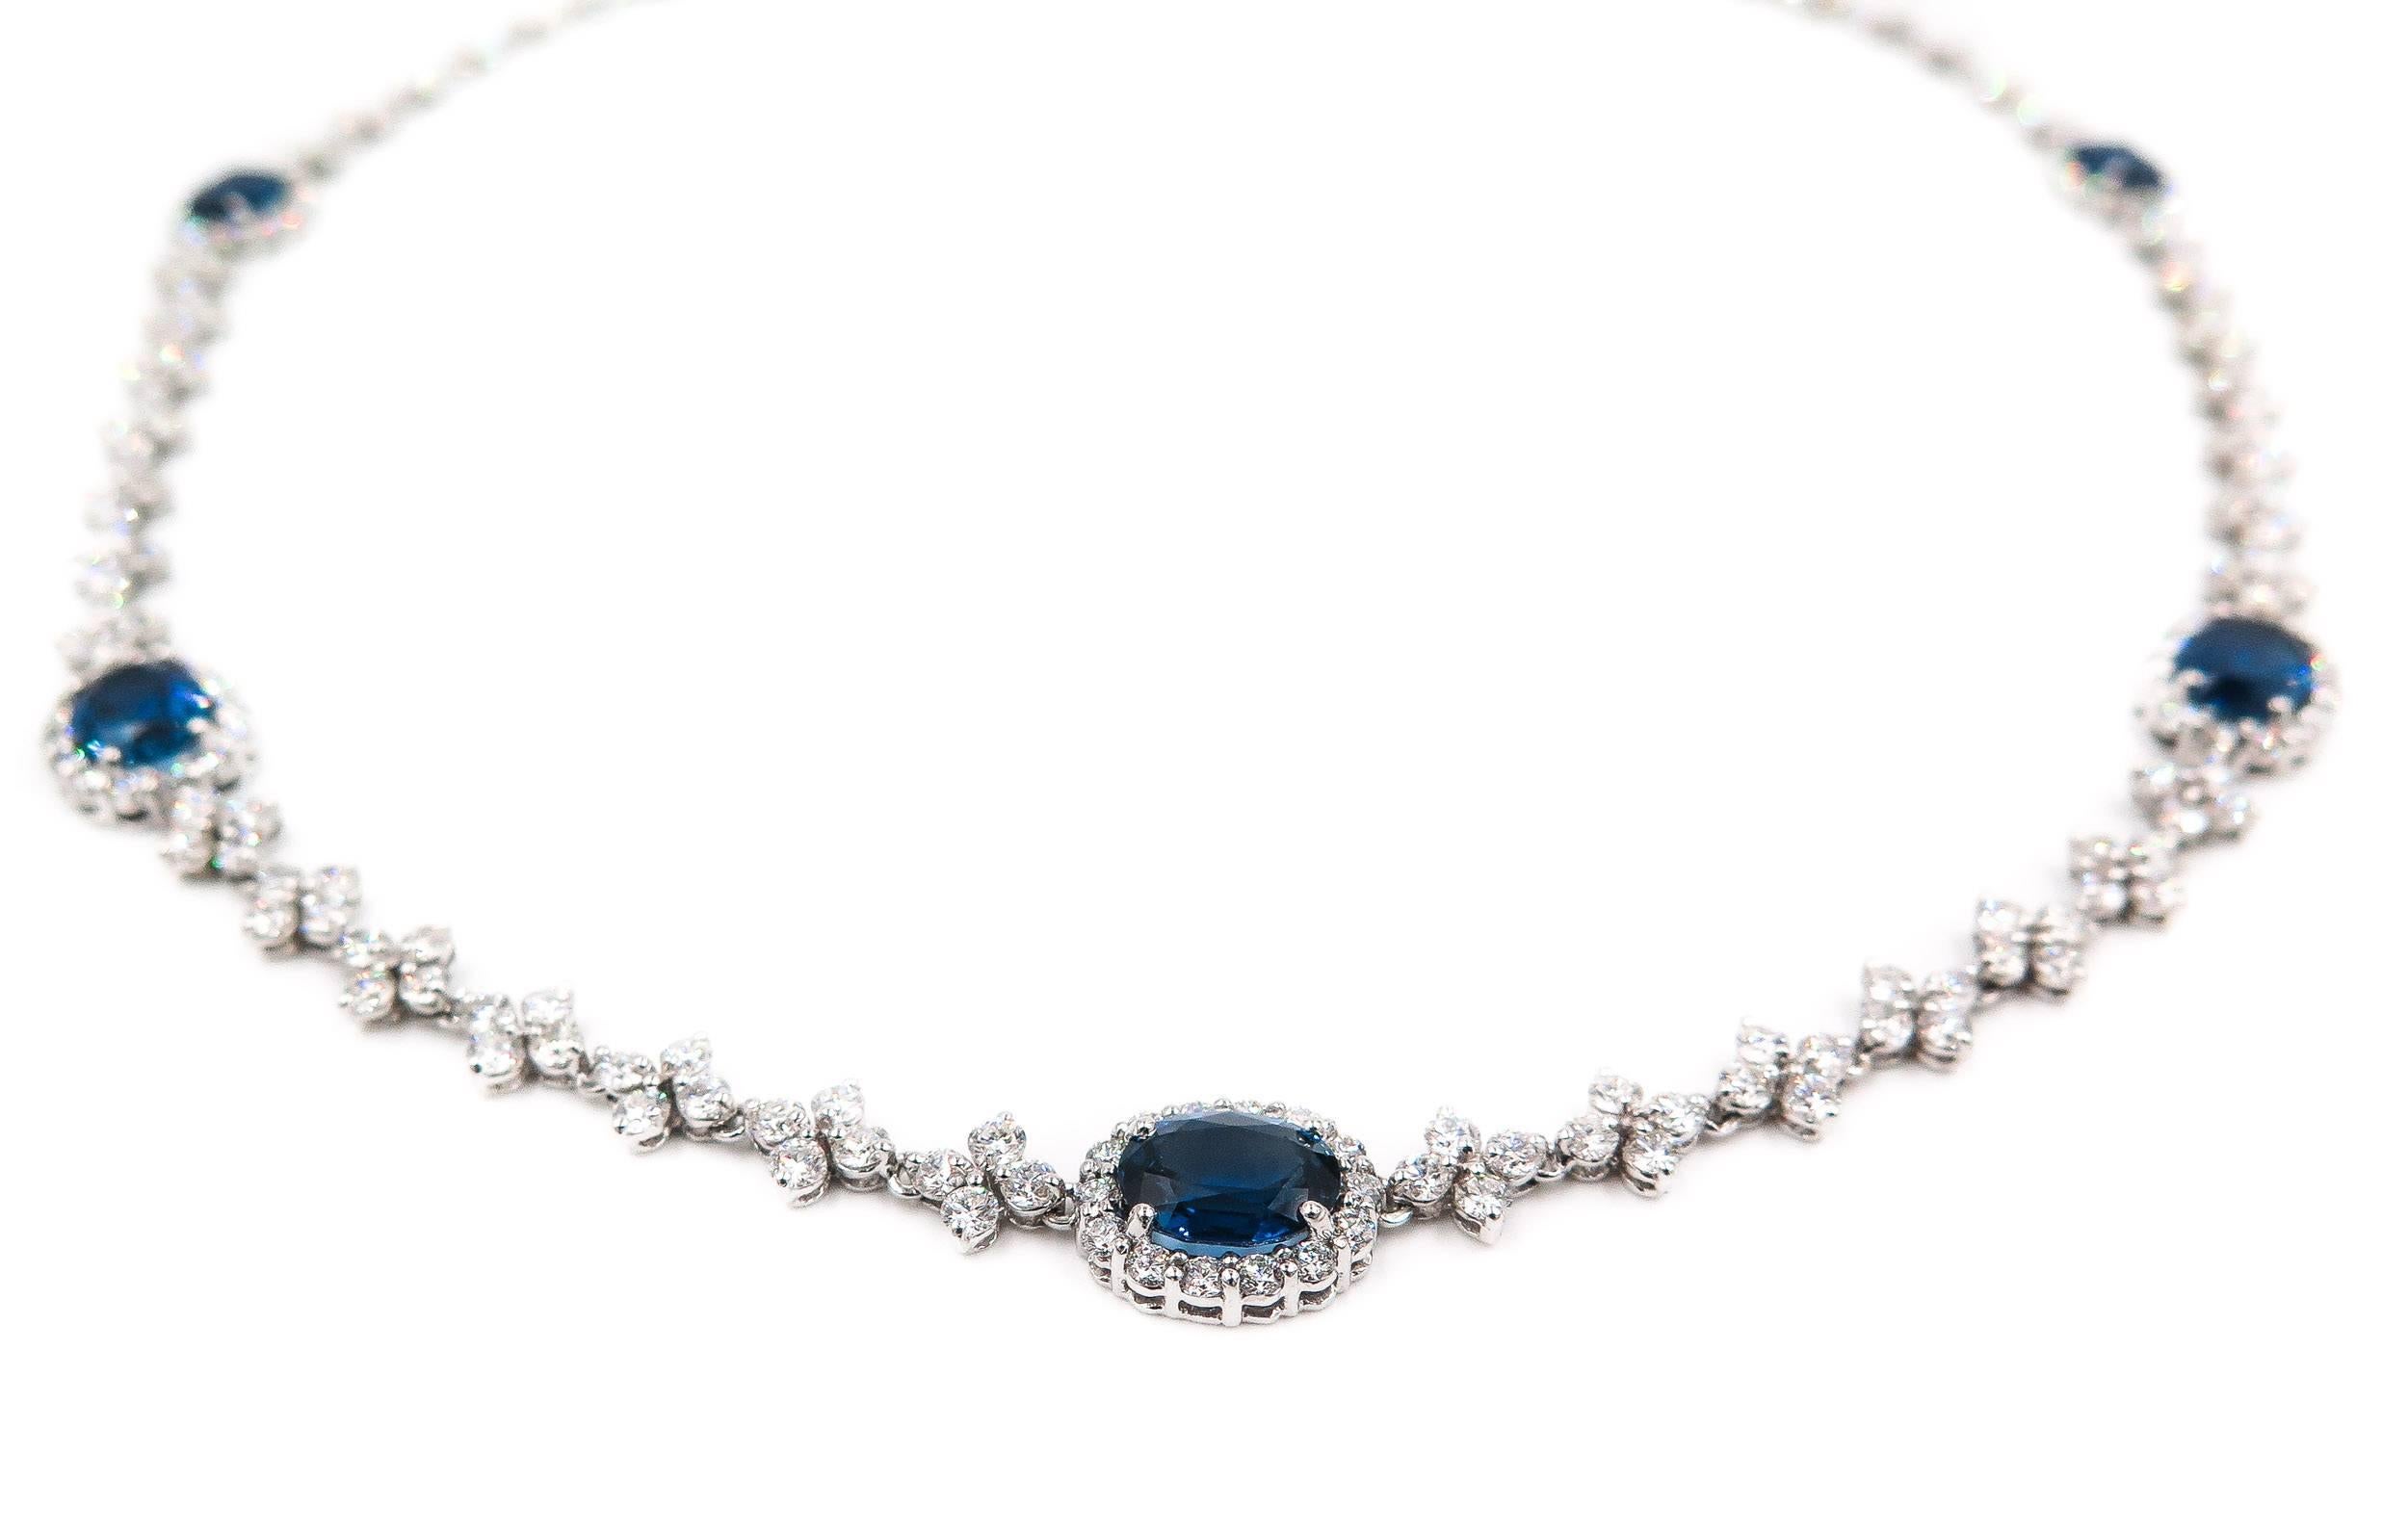 This elegant 18 karat white gold necklace designed by Leo Pizzo features 5 oval sapphires with a total carat weight of 7.08 carats that have exceptional cut and color. Each sapphire is adorned with a diamond halo. 
The diamonds have a total carat